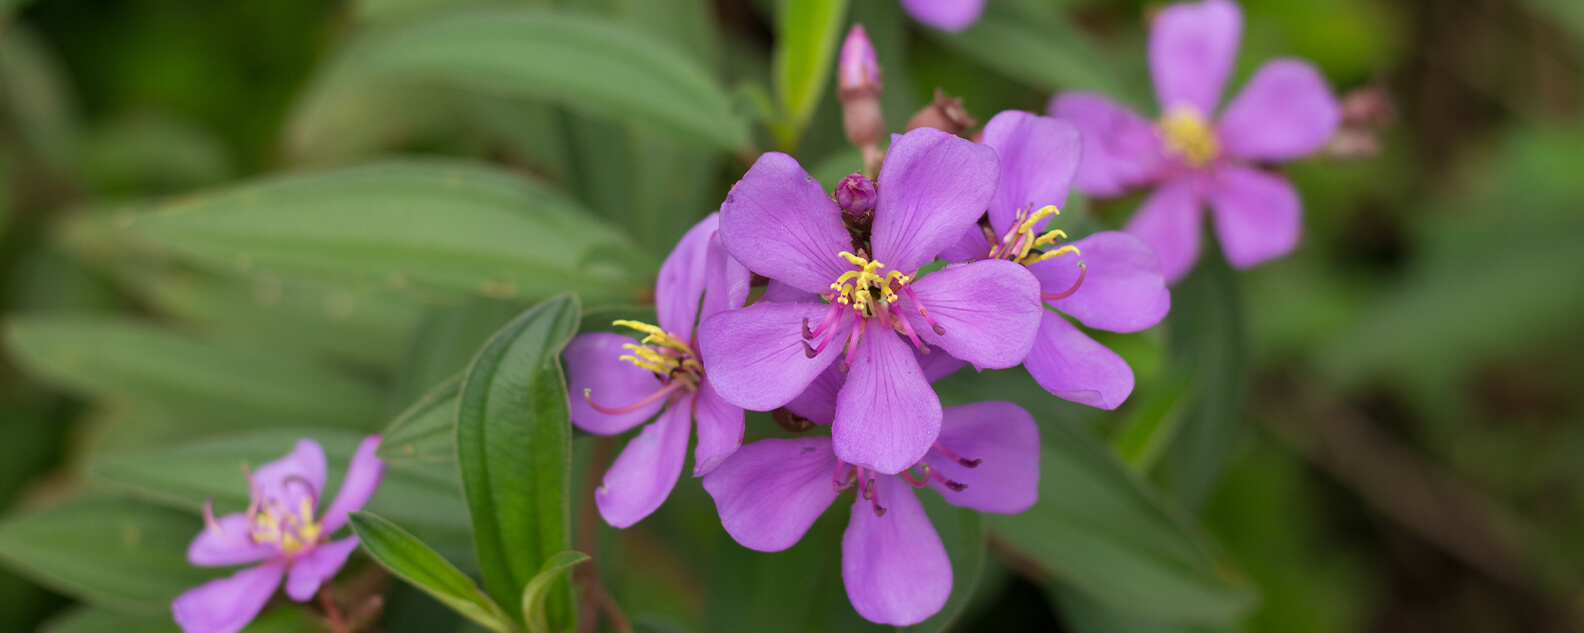 Purple flowers with yellow centres on a shrub with textured, green leaves